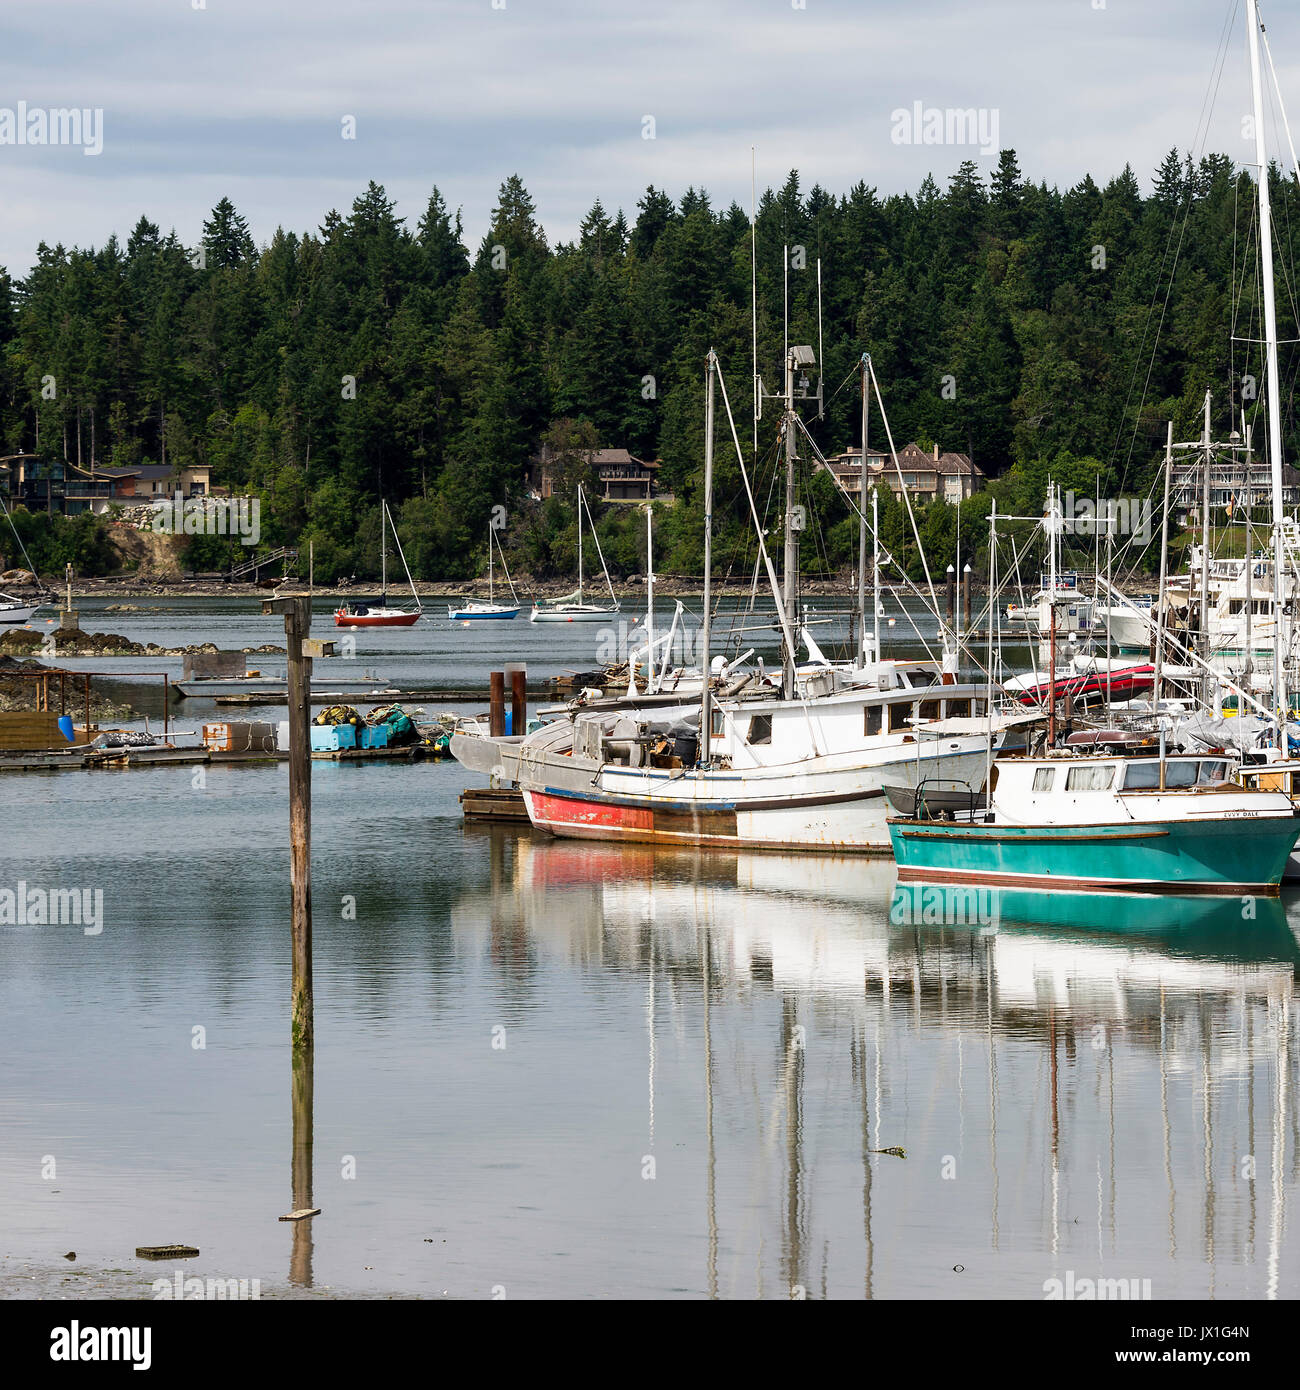 Mirror Like Images of Yachts and Boats Docked in a Marina at Tsehum Harbour near Victoria on Vancouver Island British Columbia Canada Stock Photo